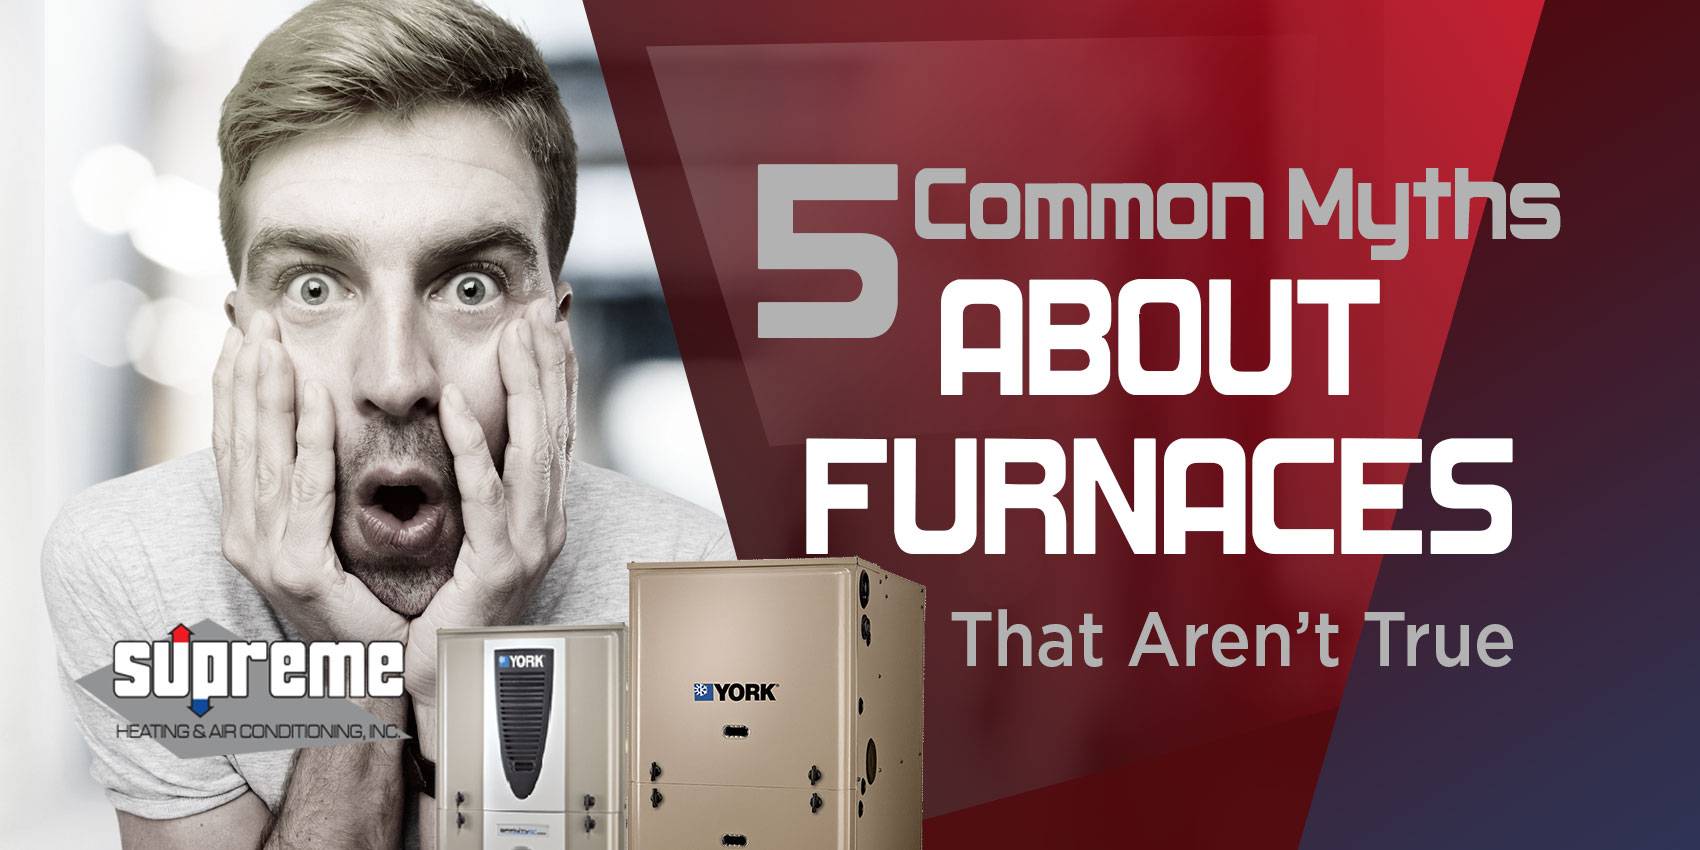 5 Common Myths About Furnaces That Aren’t True